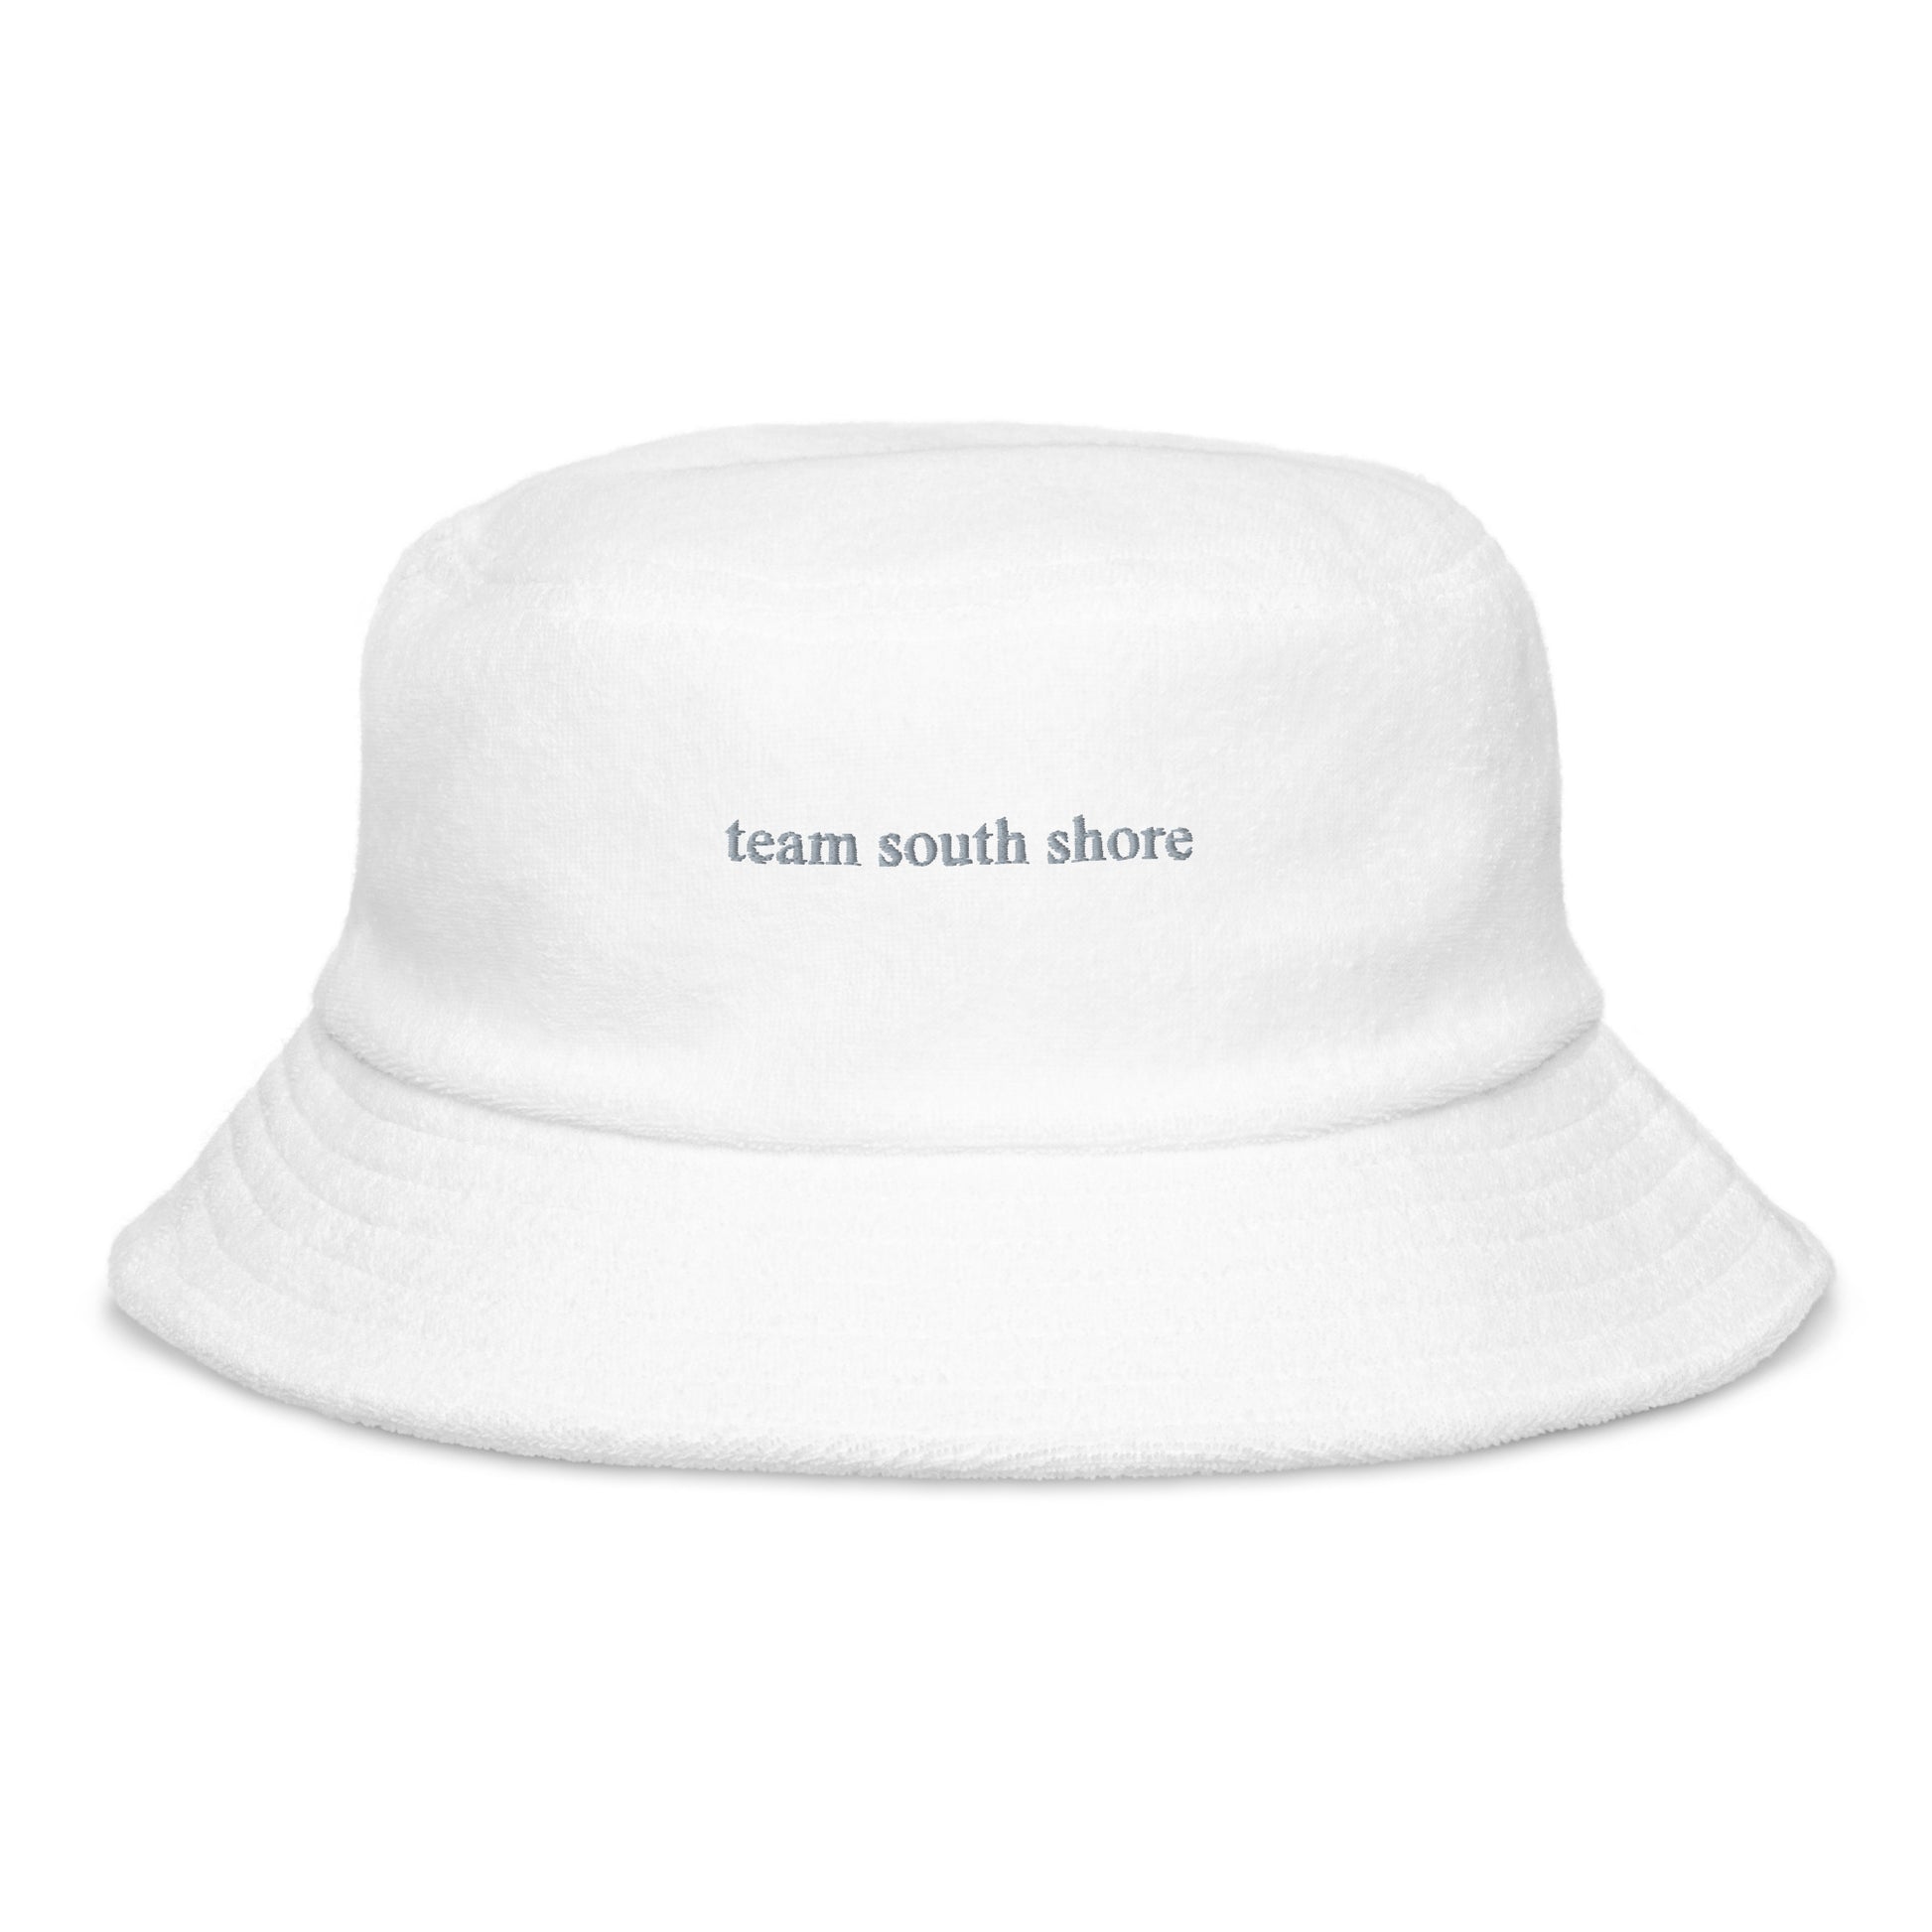 white bucket hat that says "team south shore" in grey lettering